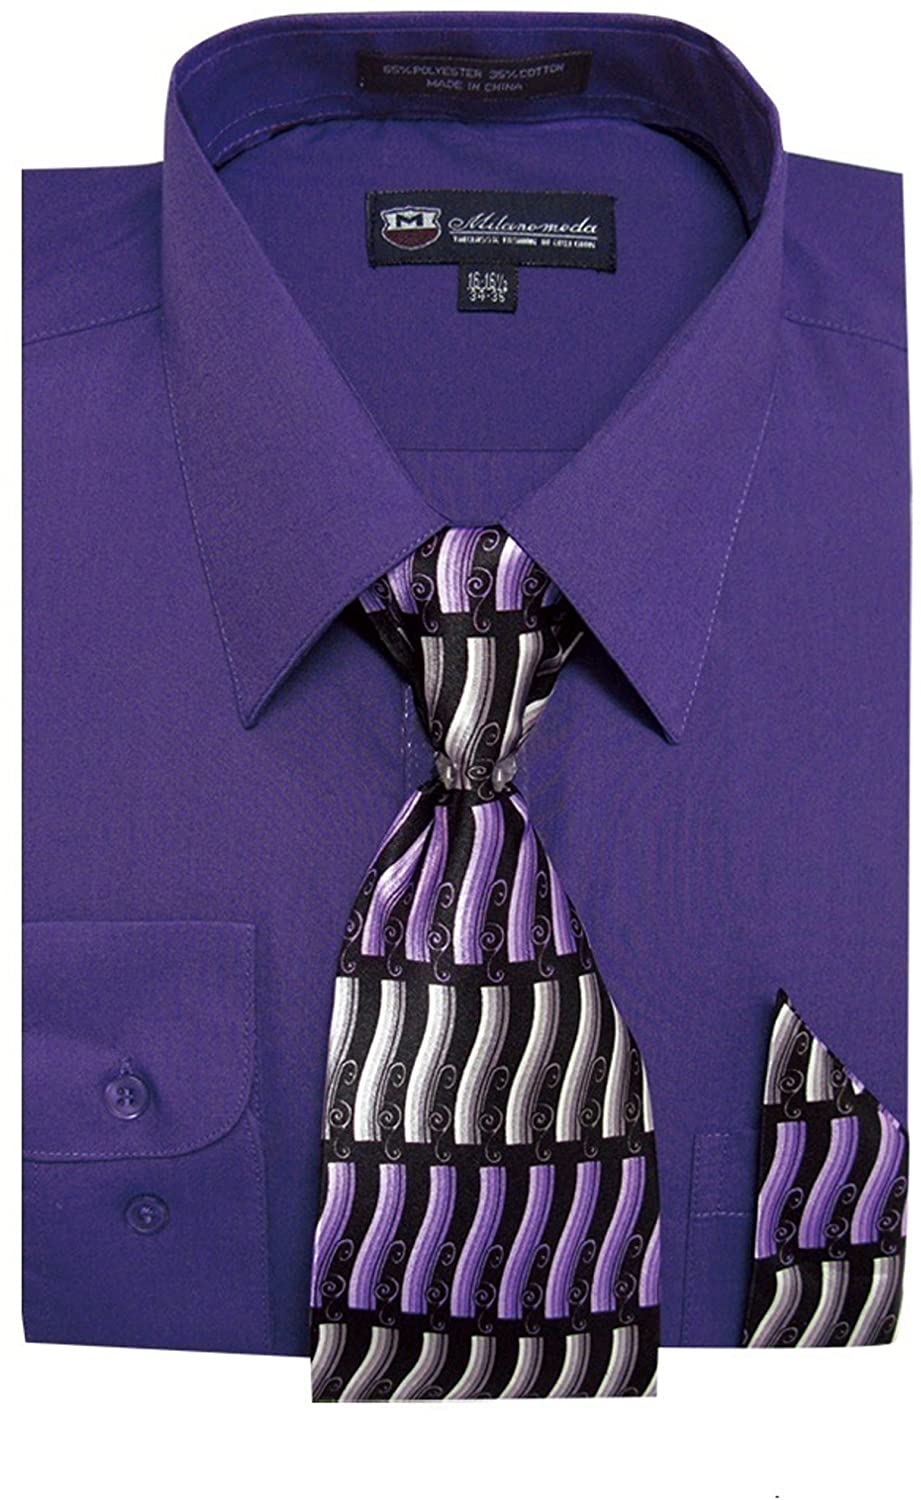 Men's Long Sleeve Dress Shirt With Matching Tie And Handkerchief SG2 